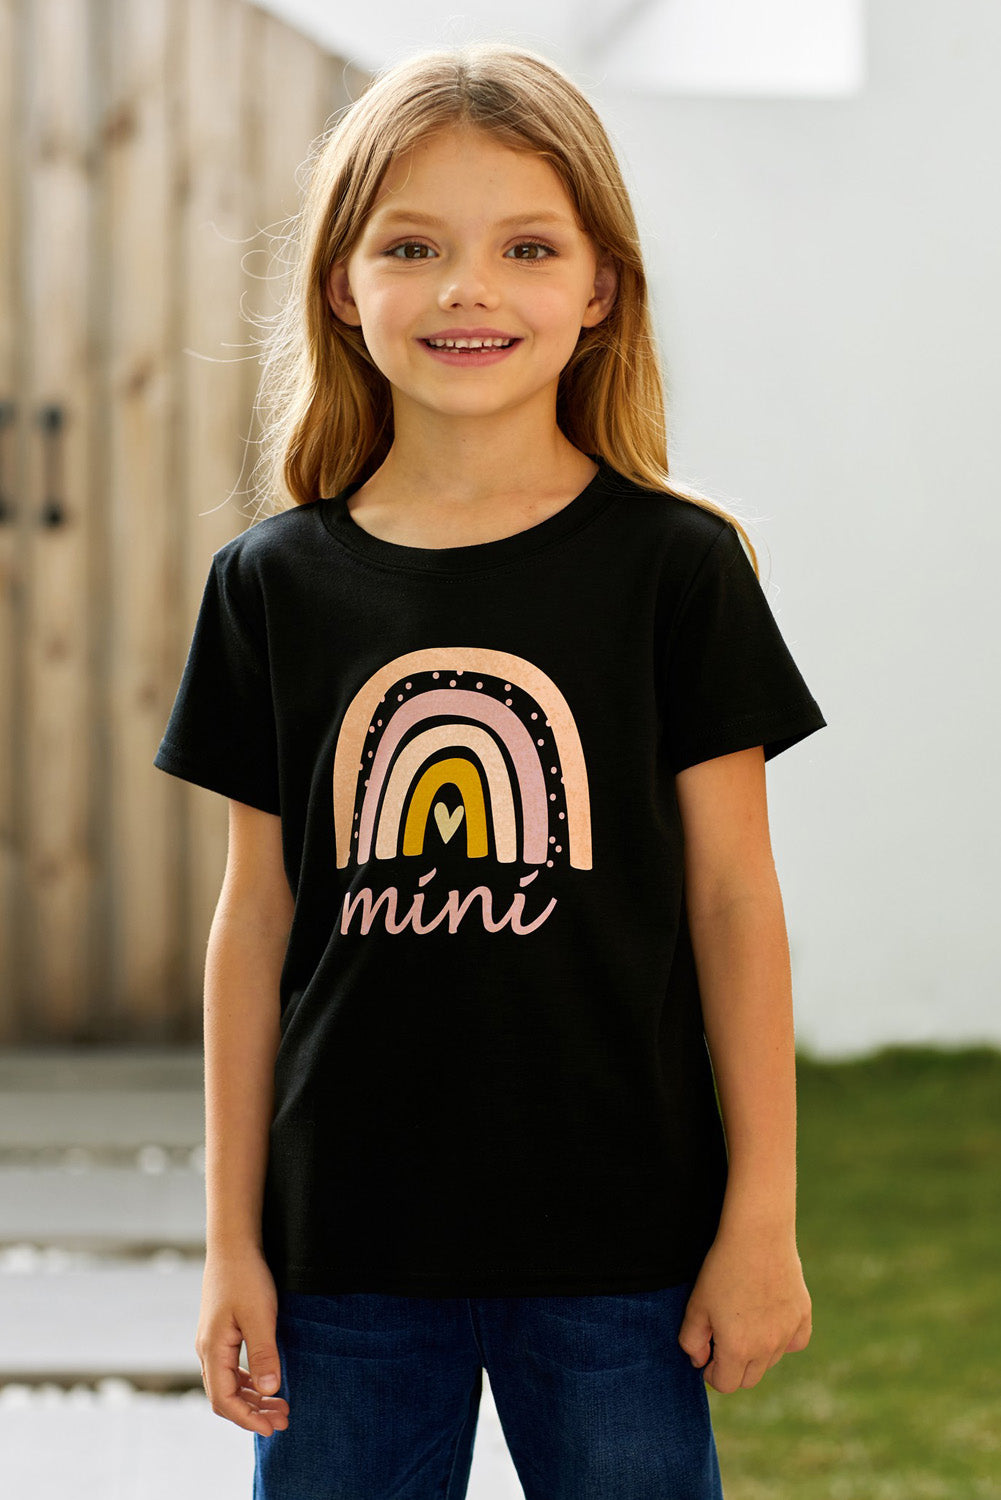 2 Colors - Girls Graphic Round Neck Tee Shirt - Sizes 4T-12 Kids Ti Amo I love you